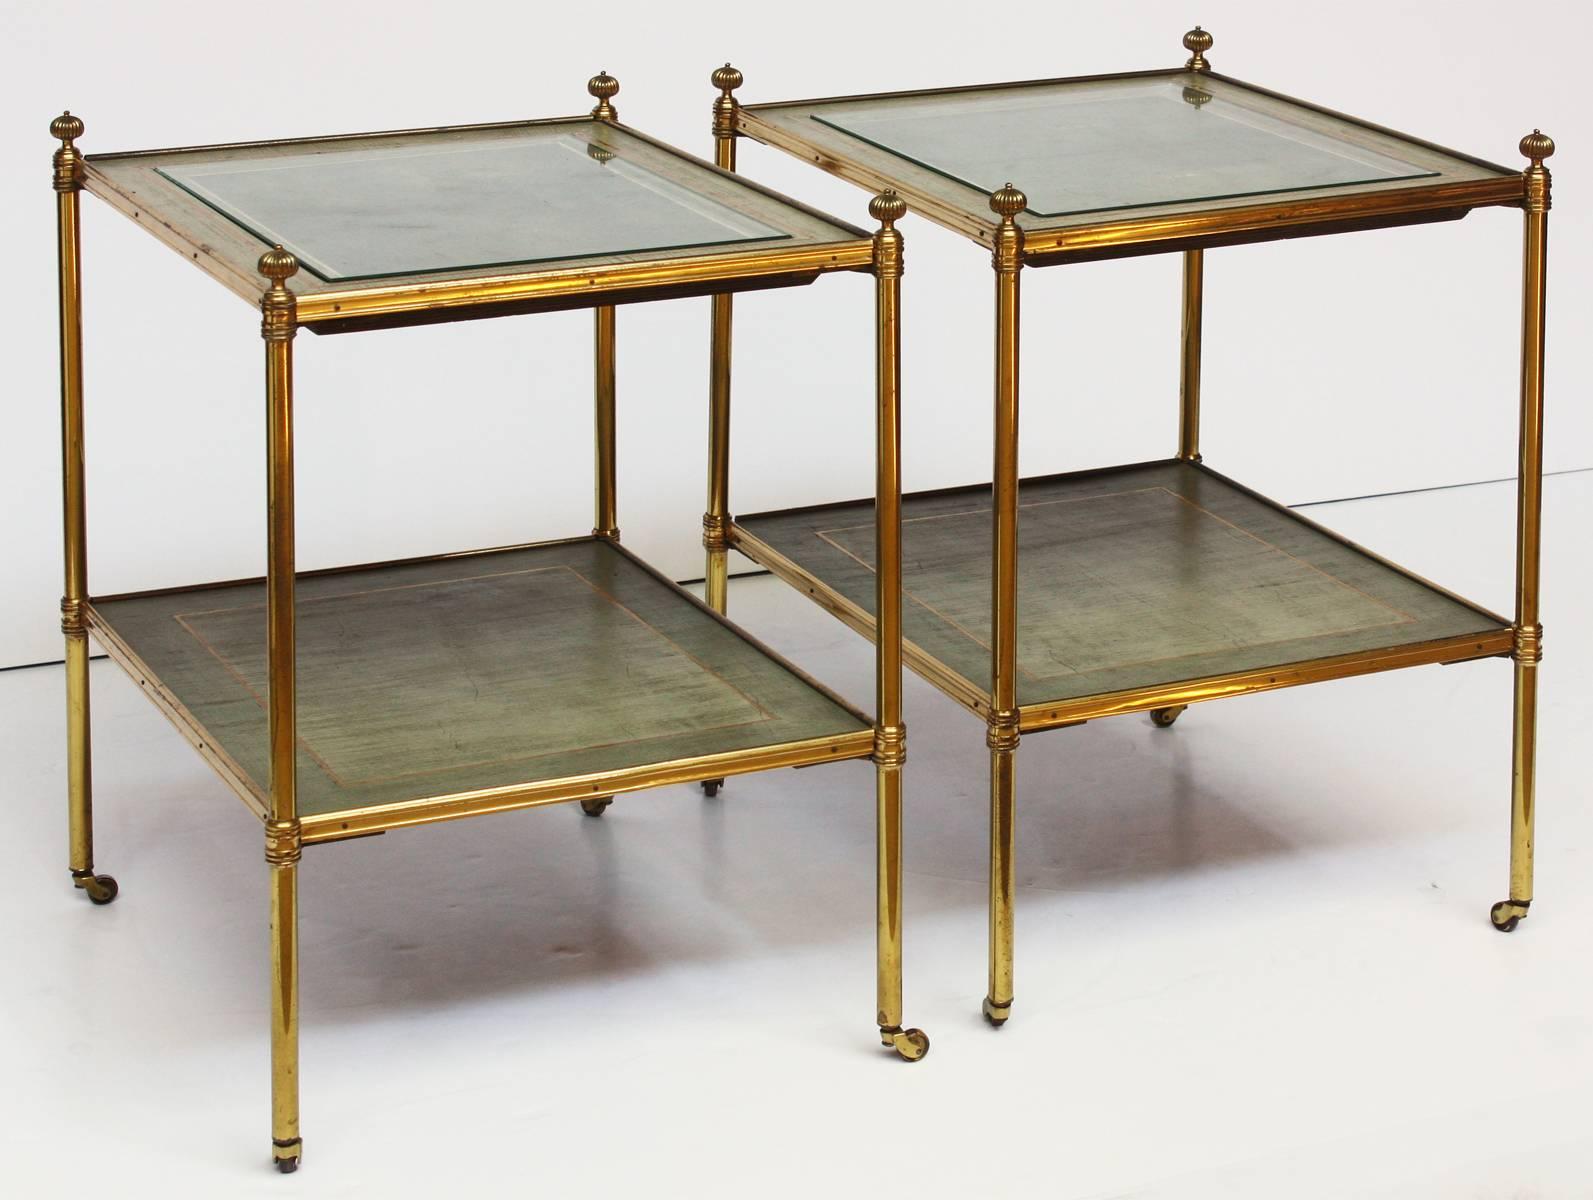 Hollywood Regency Pair of Baguès Tables with Inset Bookmatched Shagreen